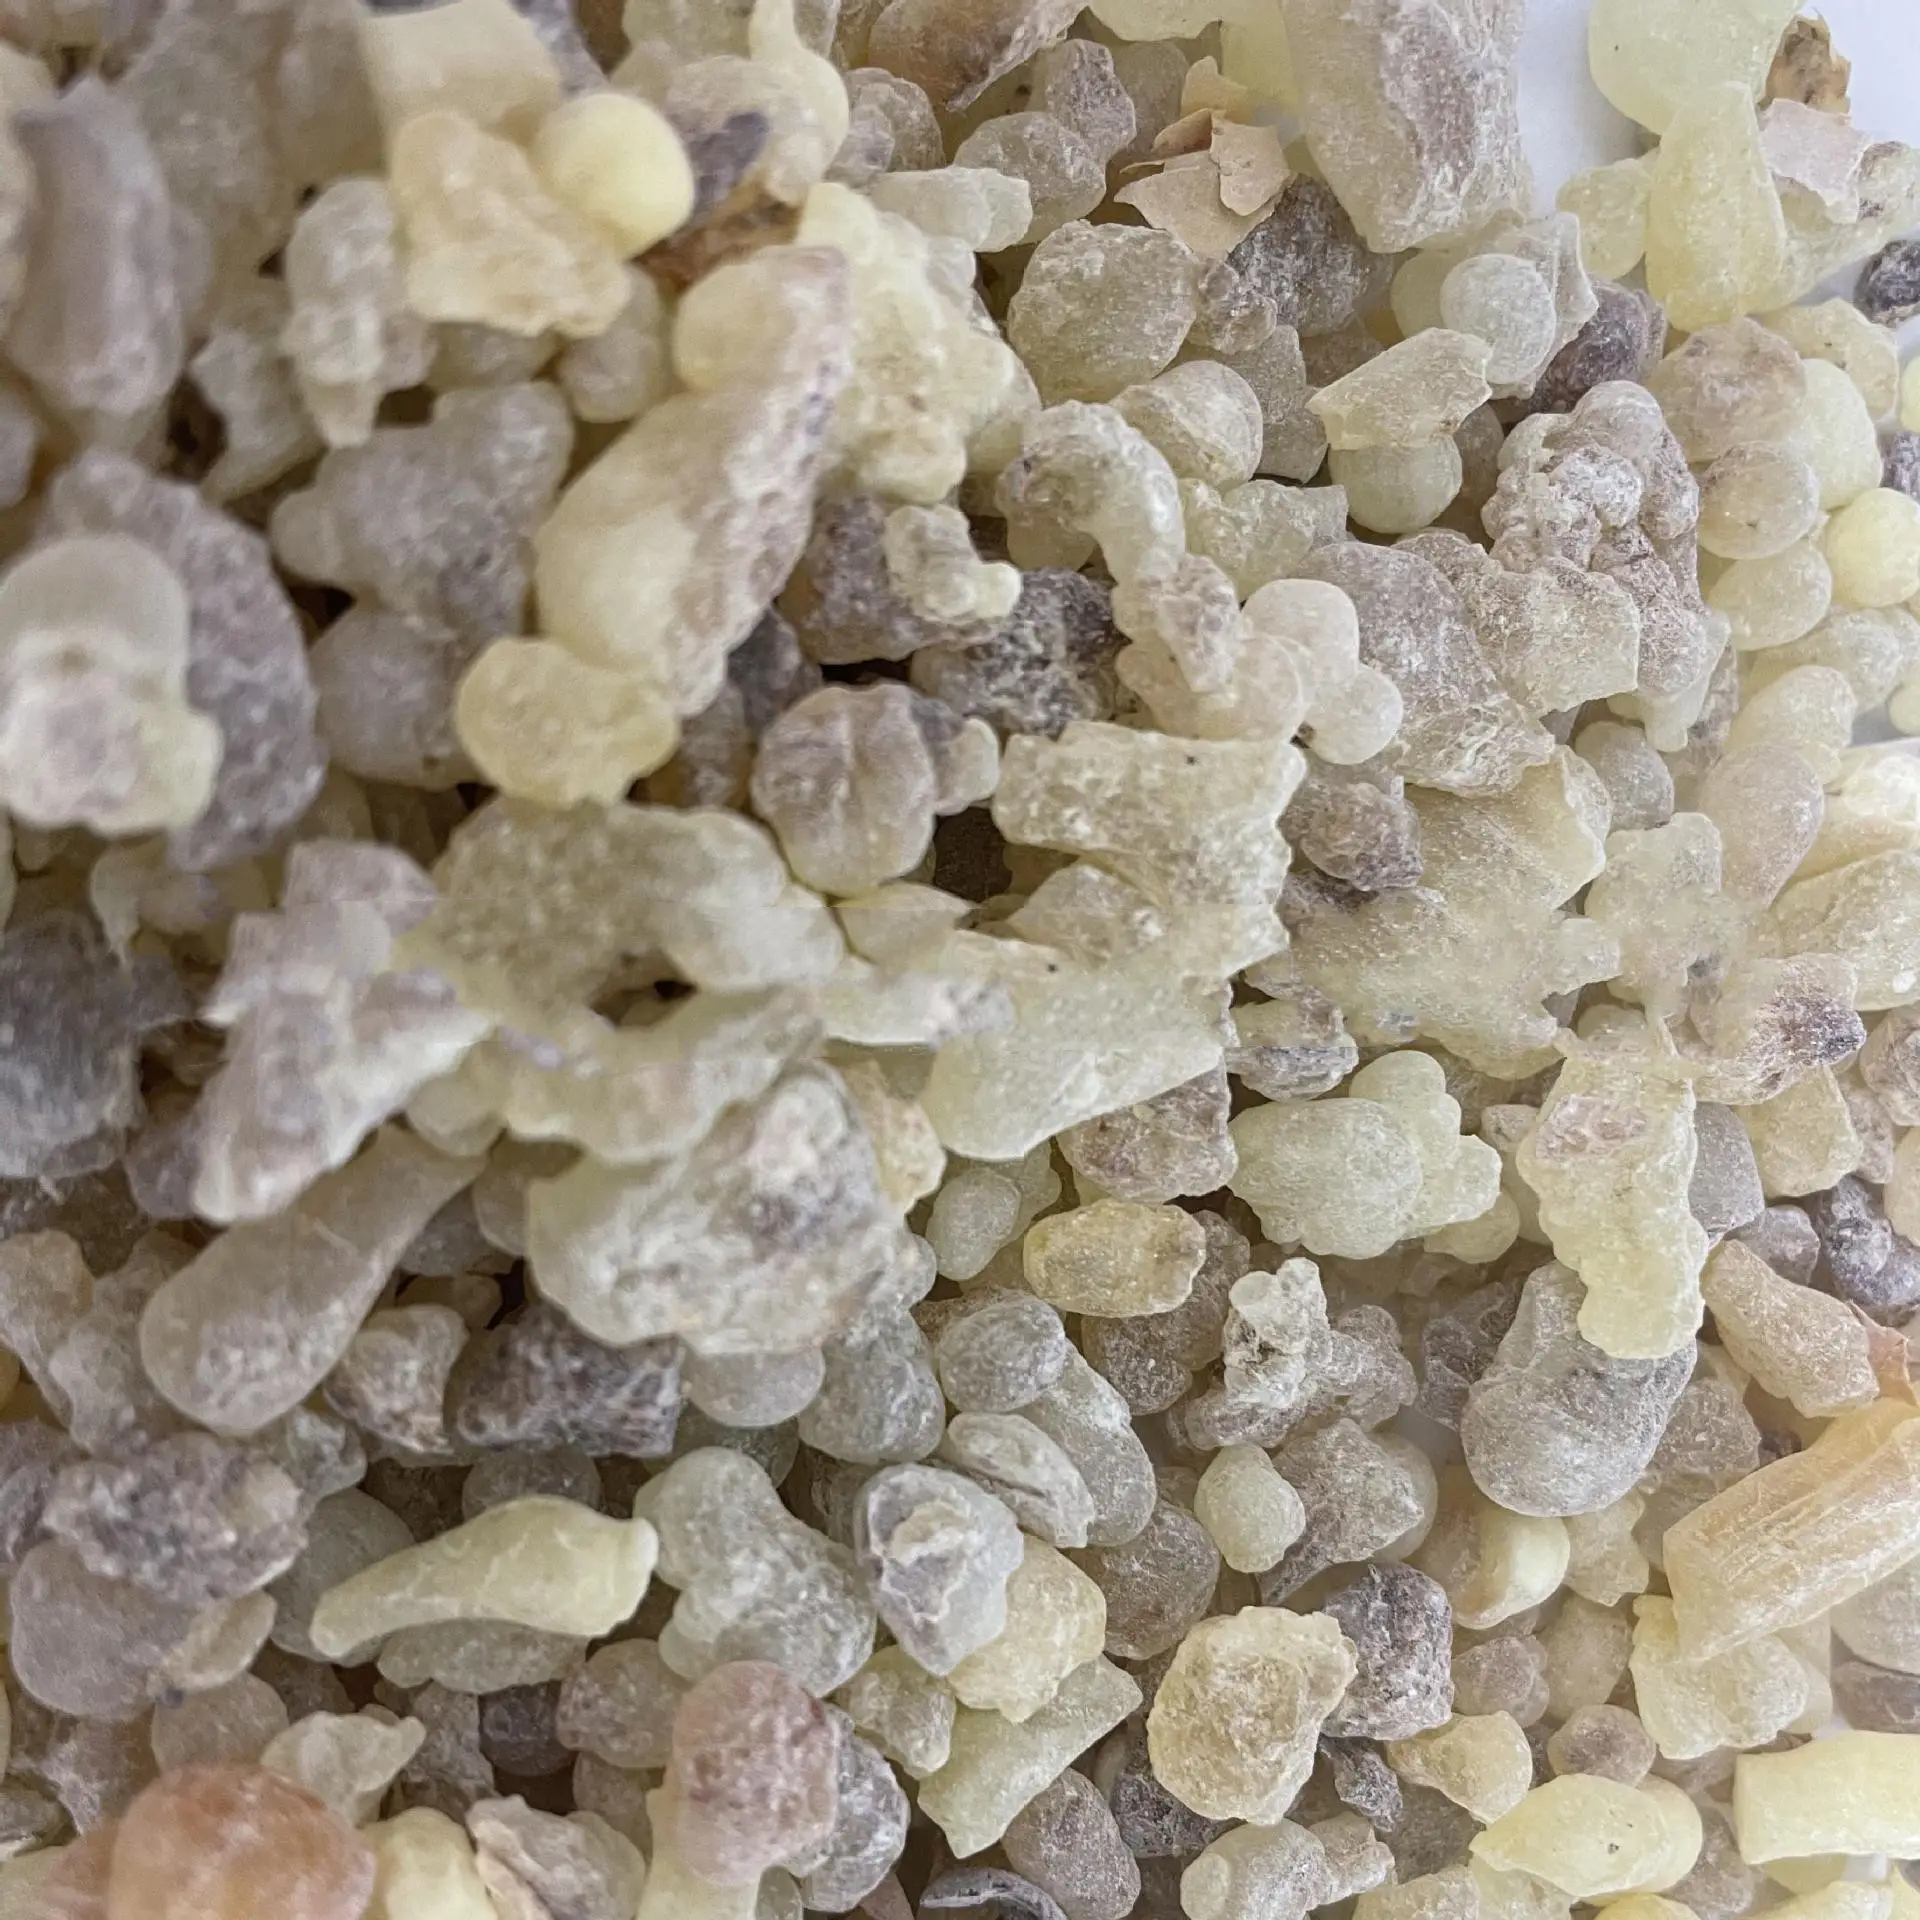 100% pure Somali frankincense extract essential oil hydrosol similar to Oman frankincense resin